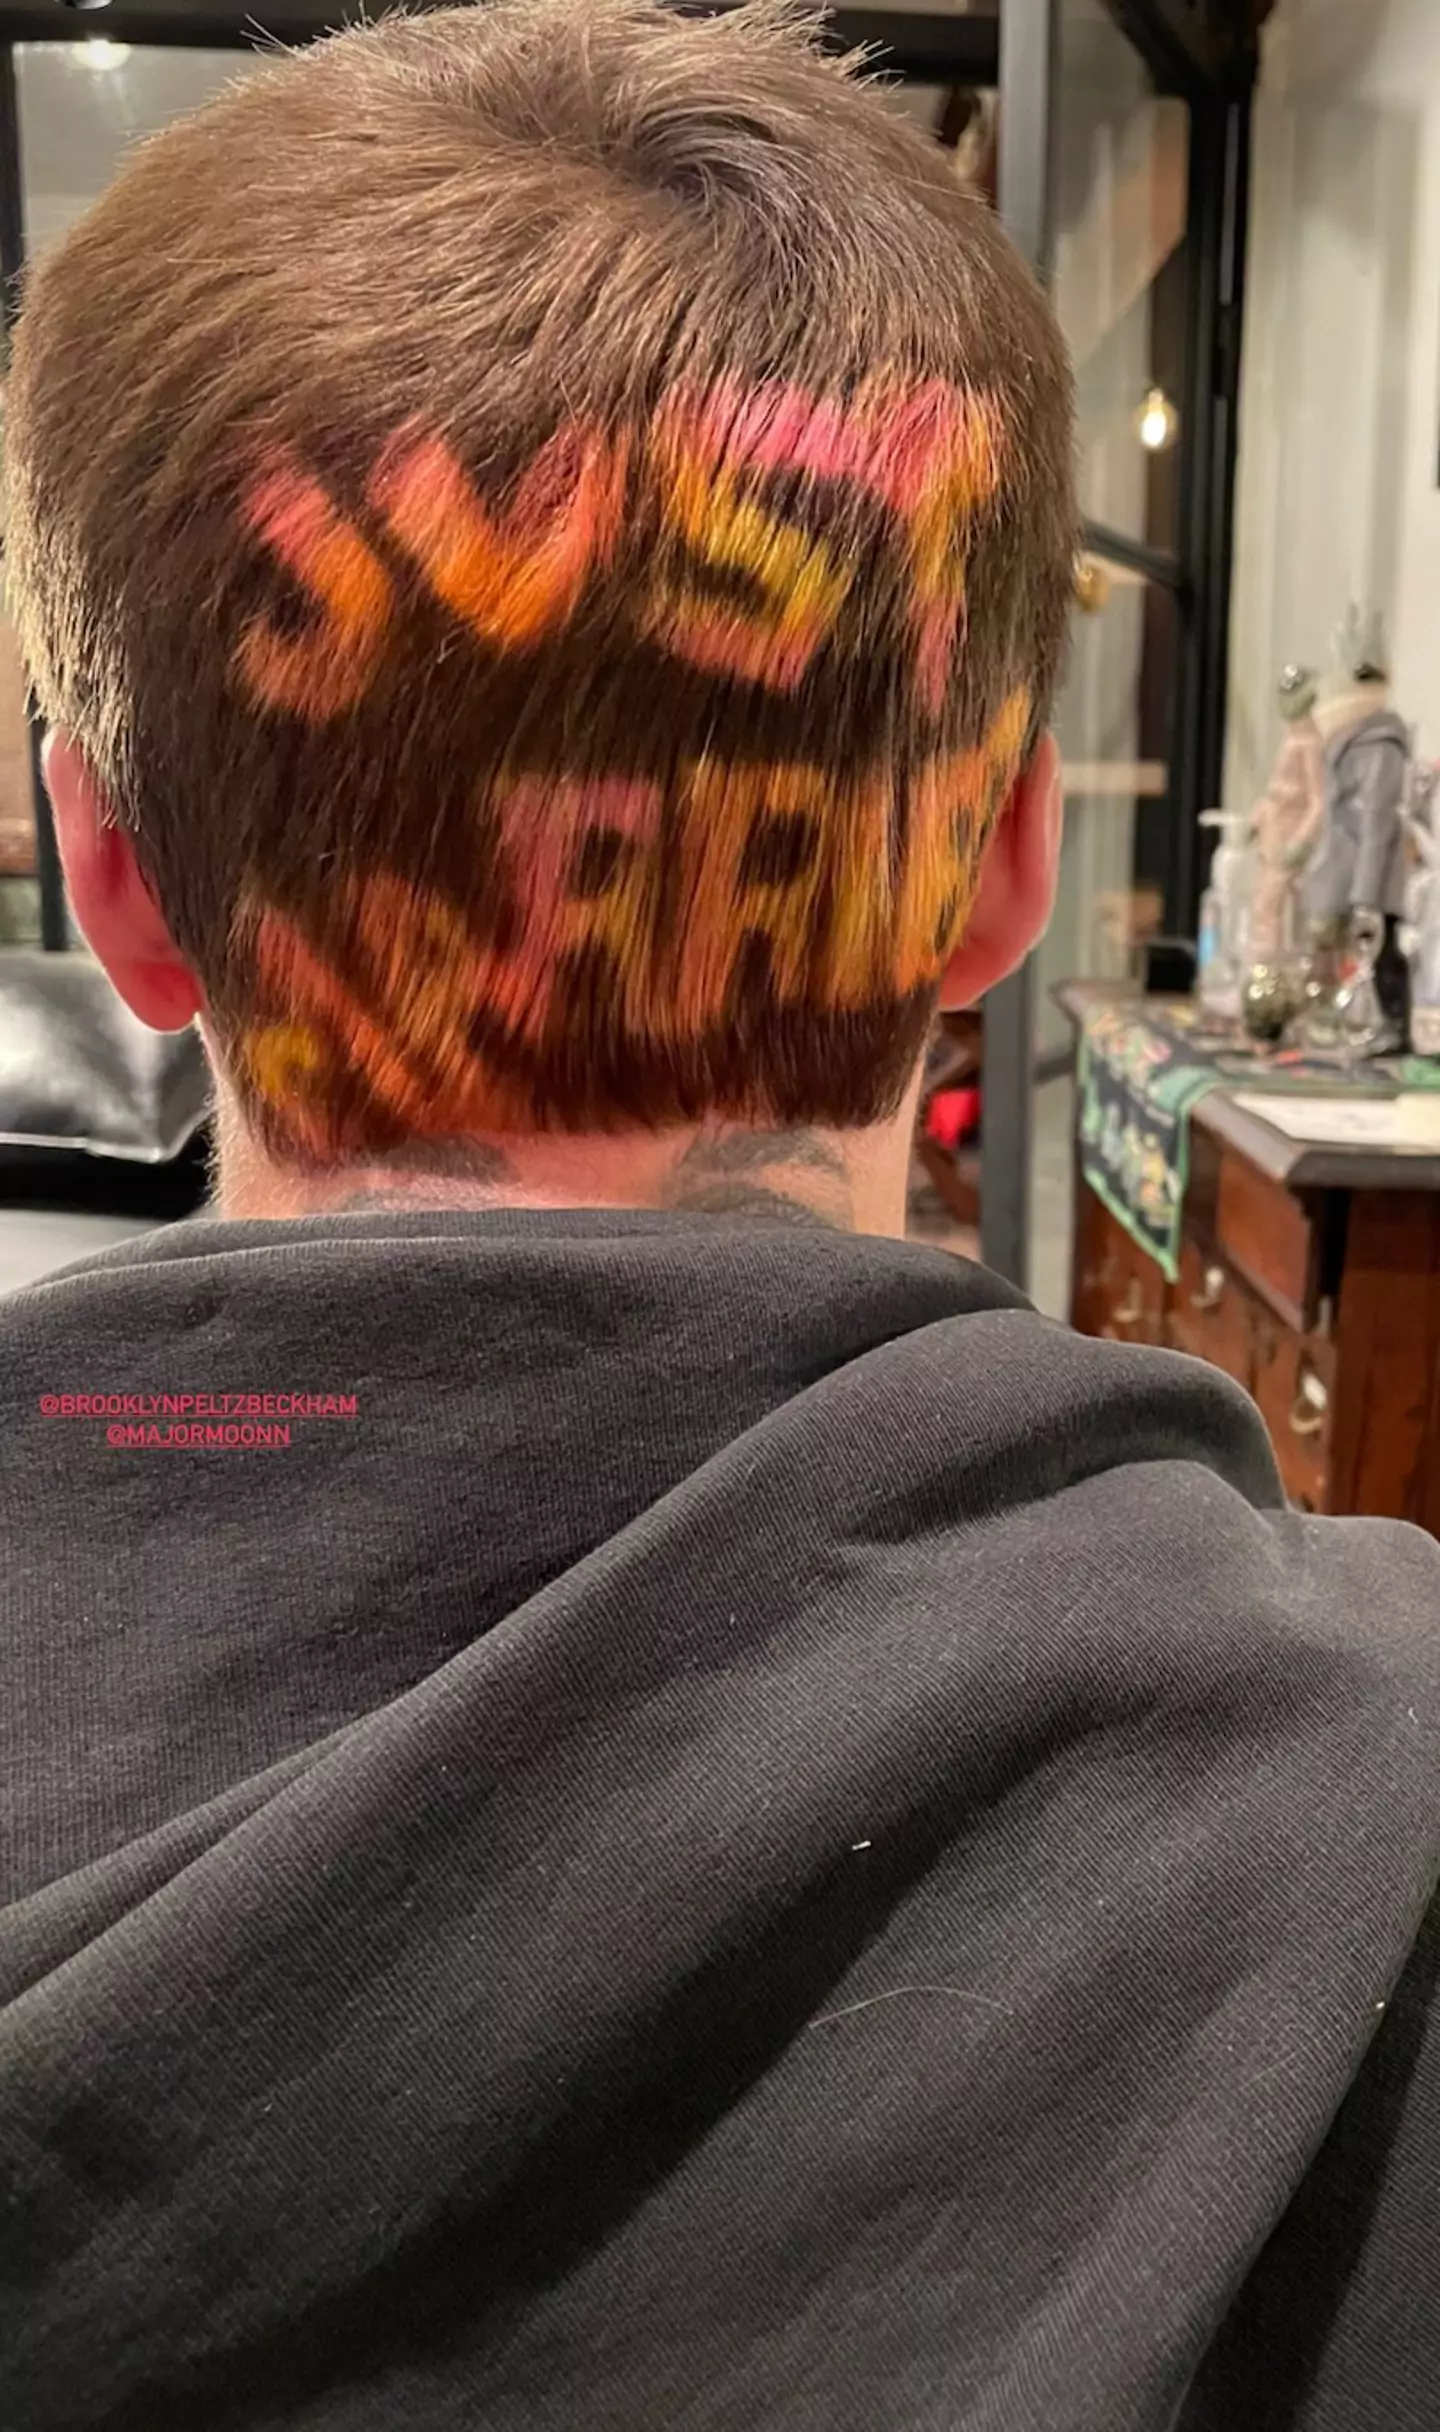 Brooklyn dyed his hair in tribute to his wife.